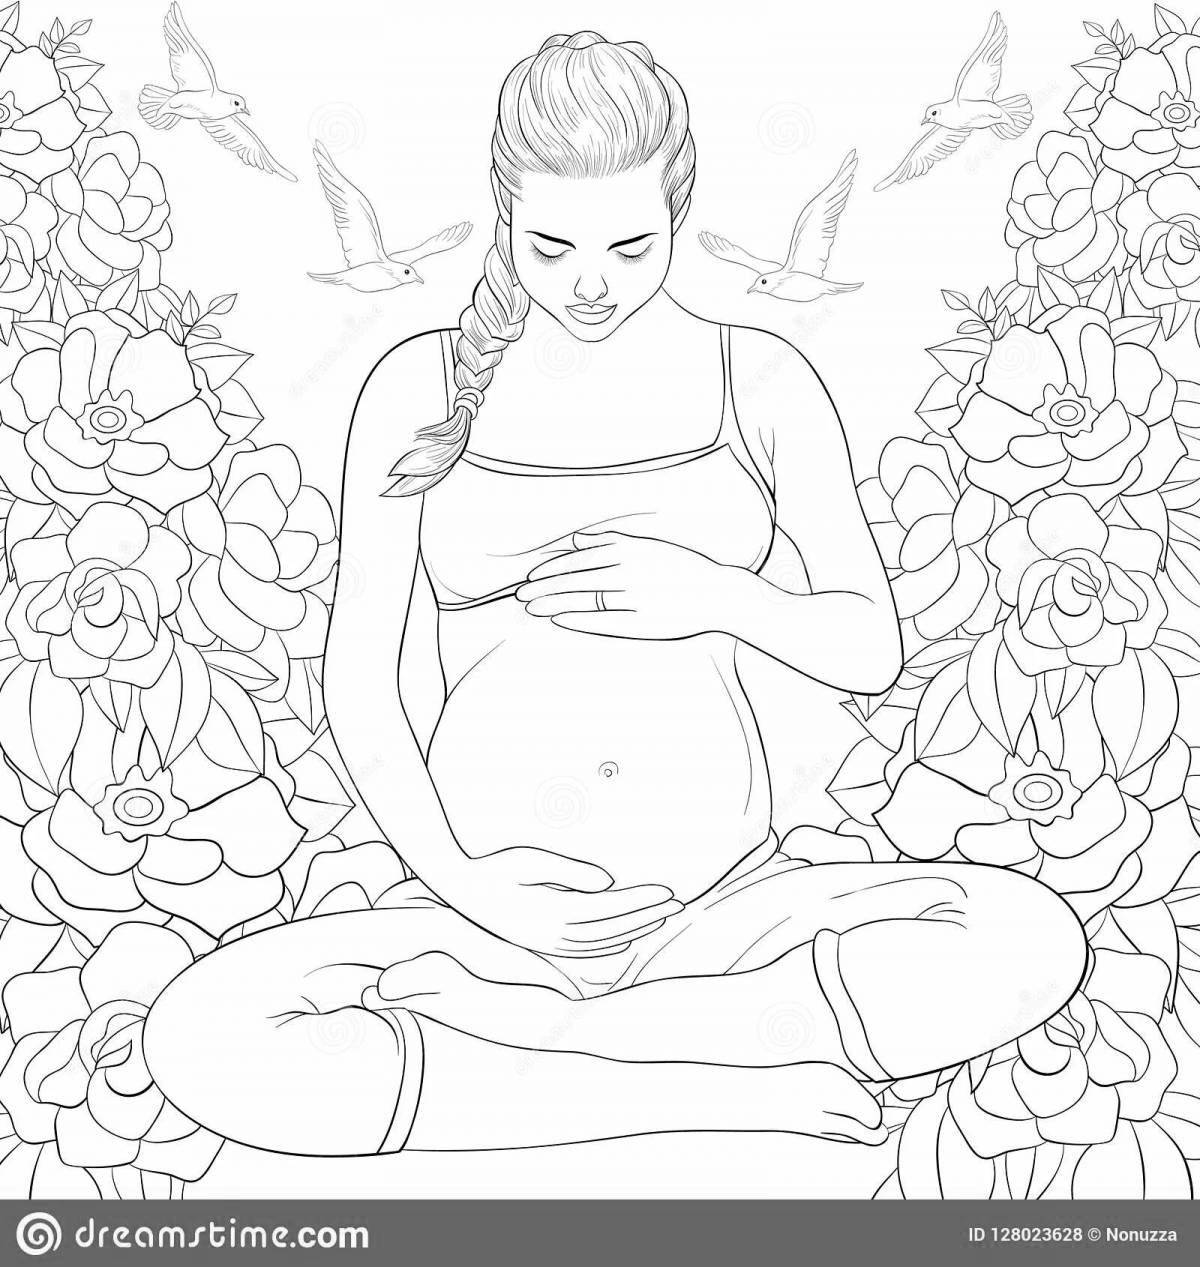 Pregnancy inspirational coloring book